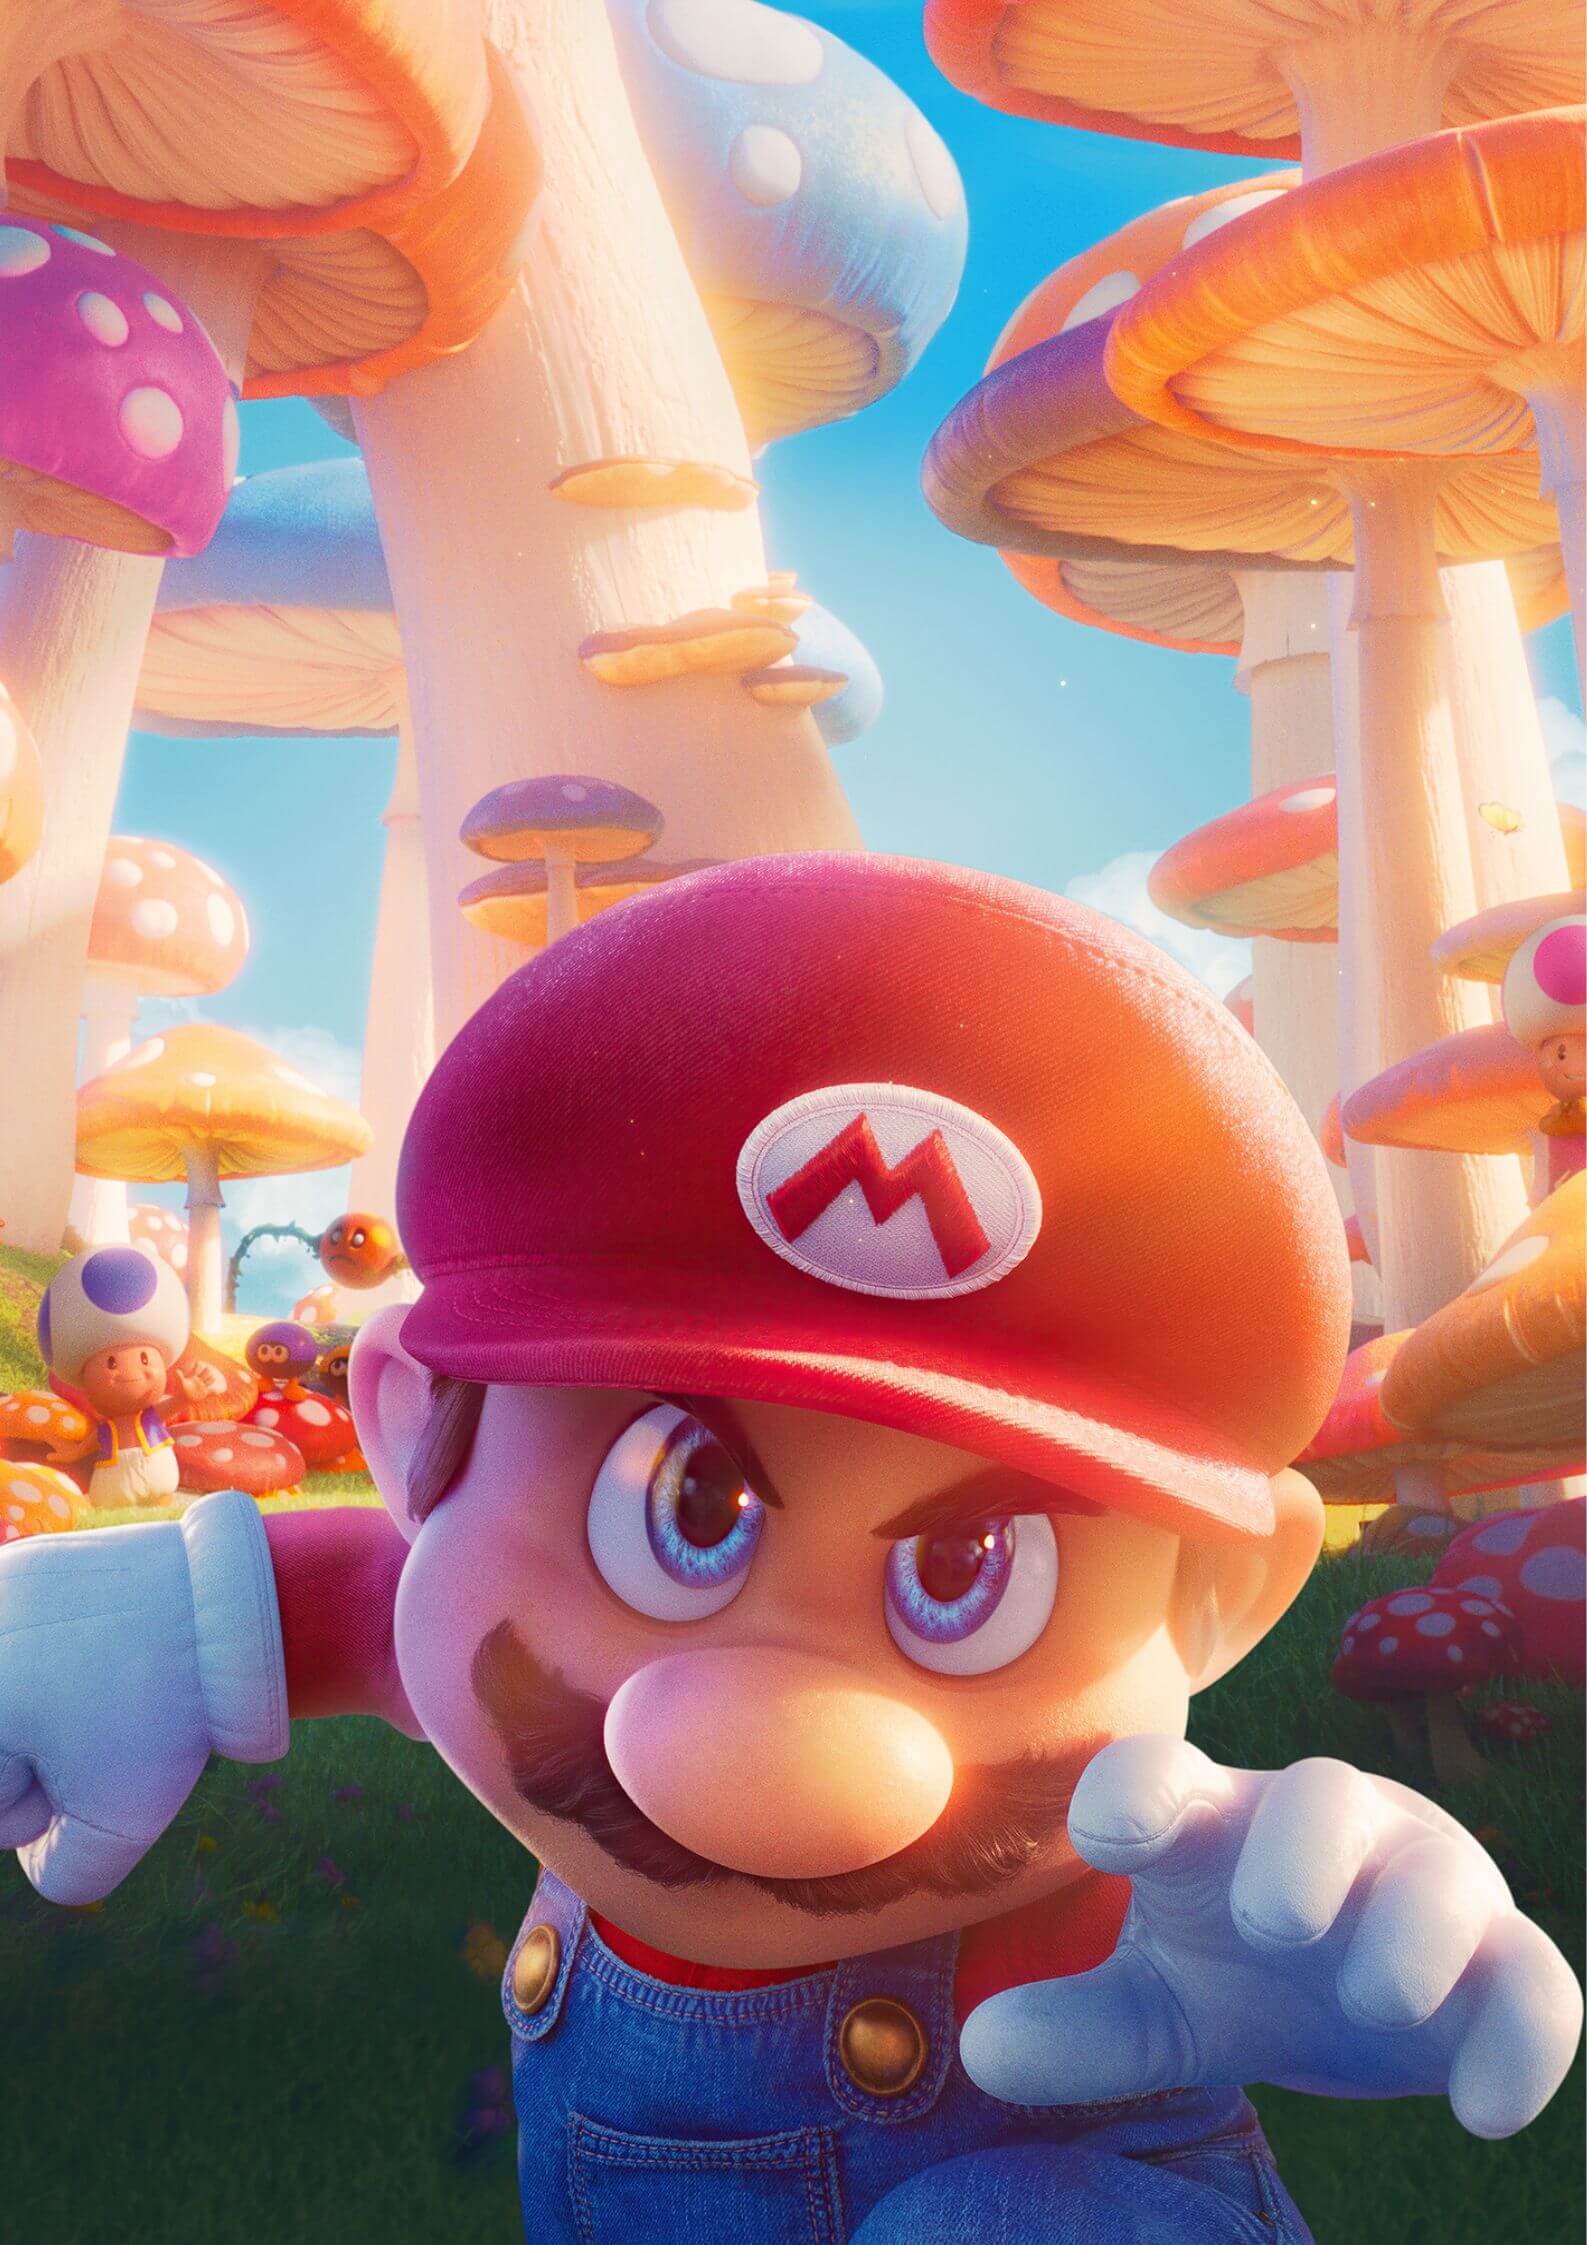 Review: The Super Mario Bros. Movie is a madcap love letter to fans